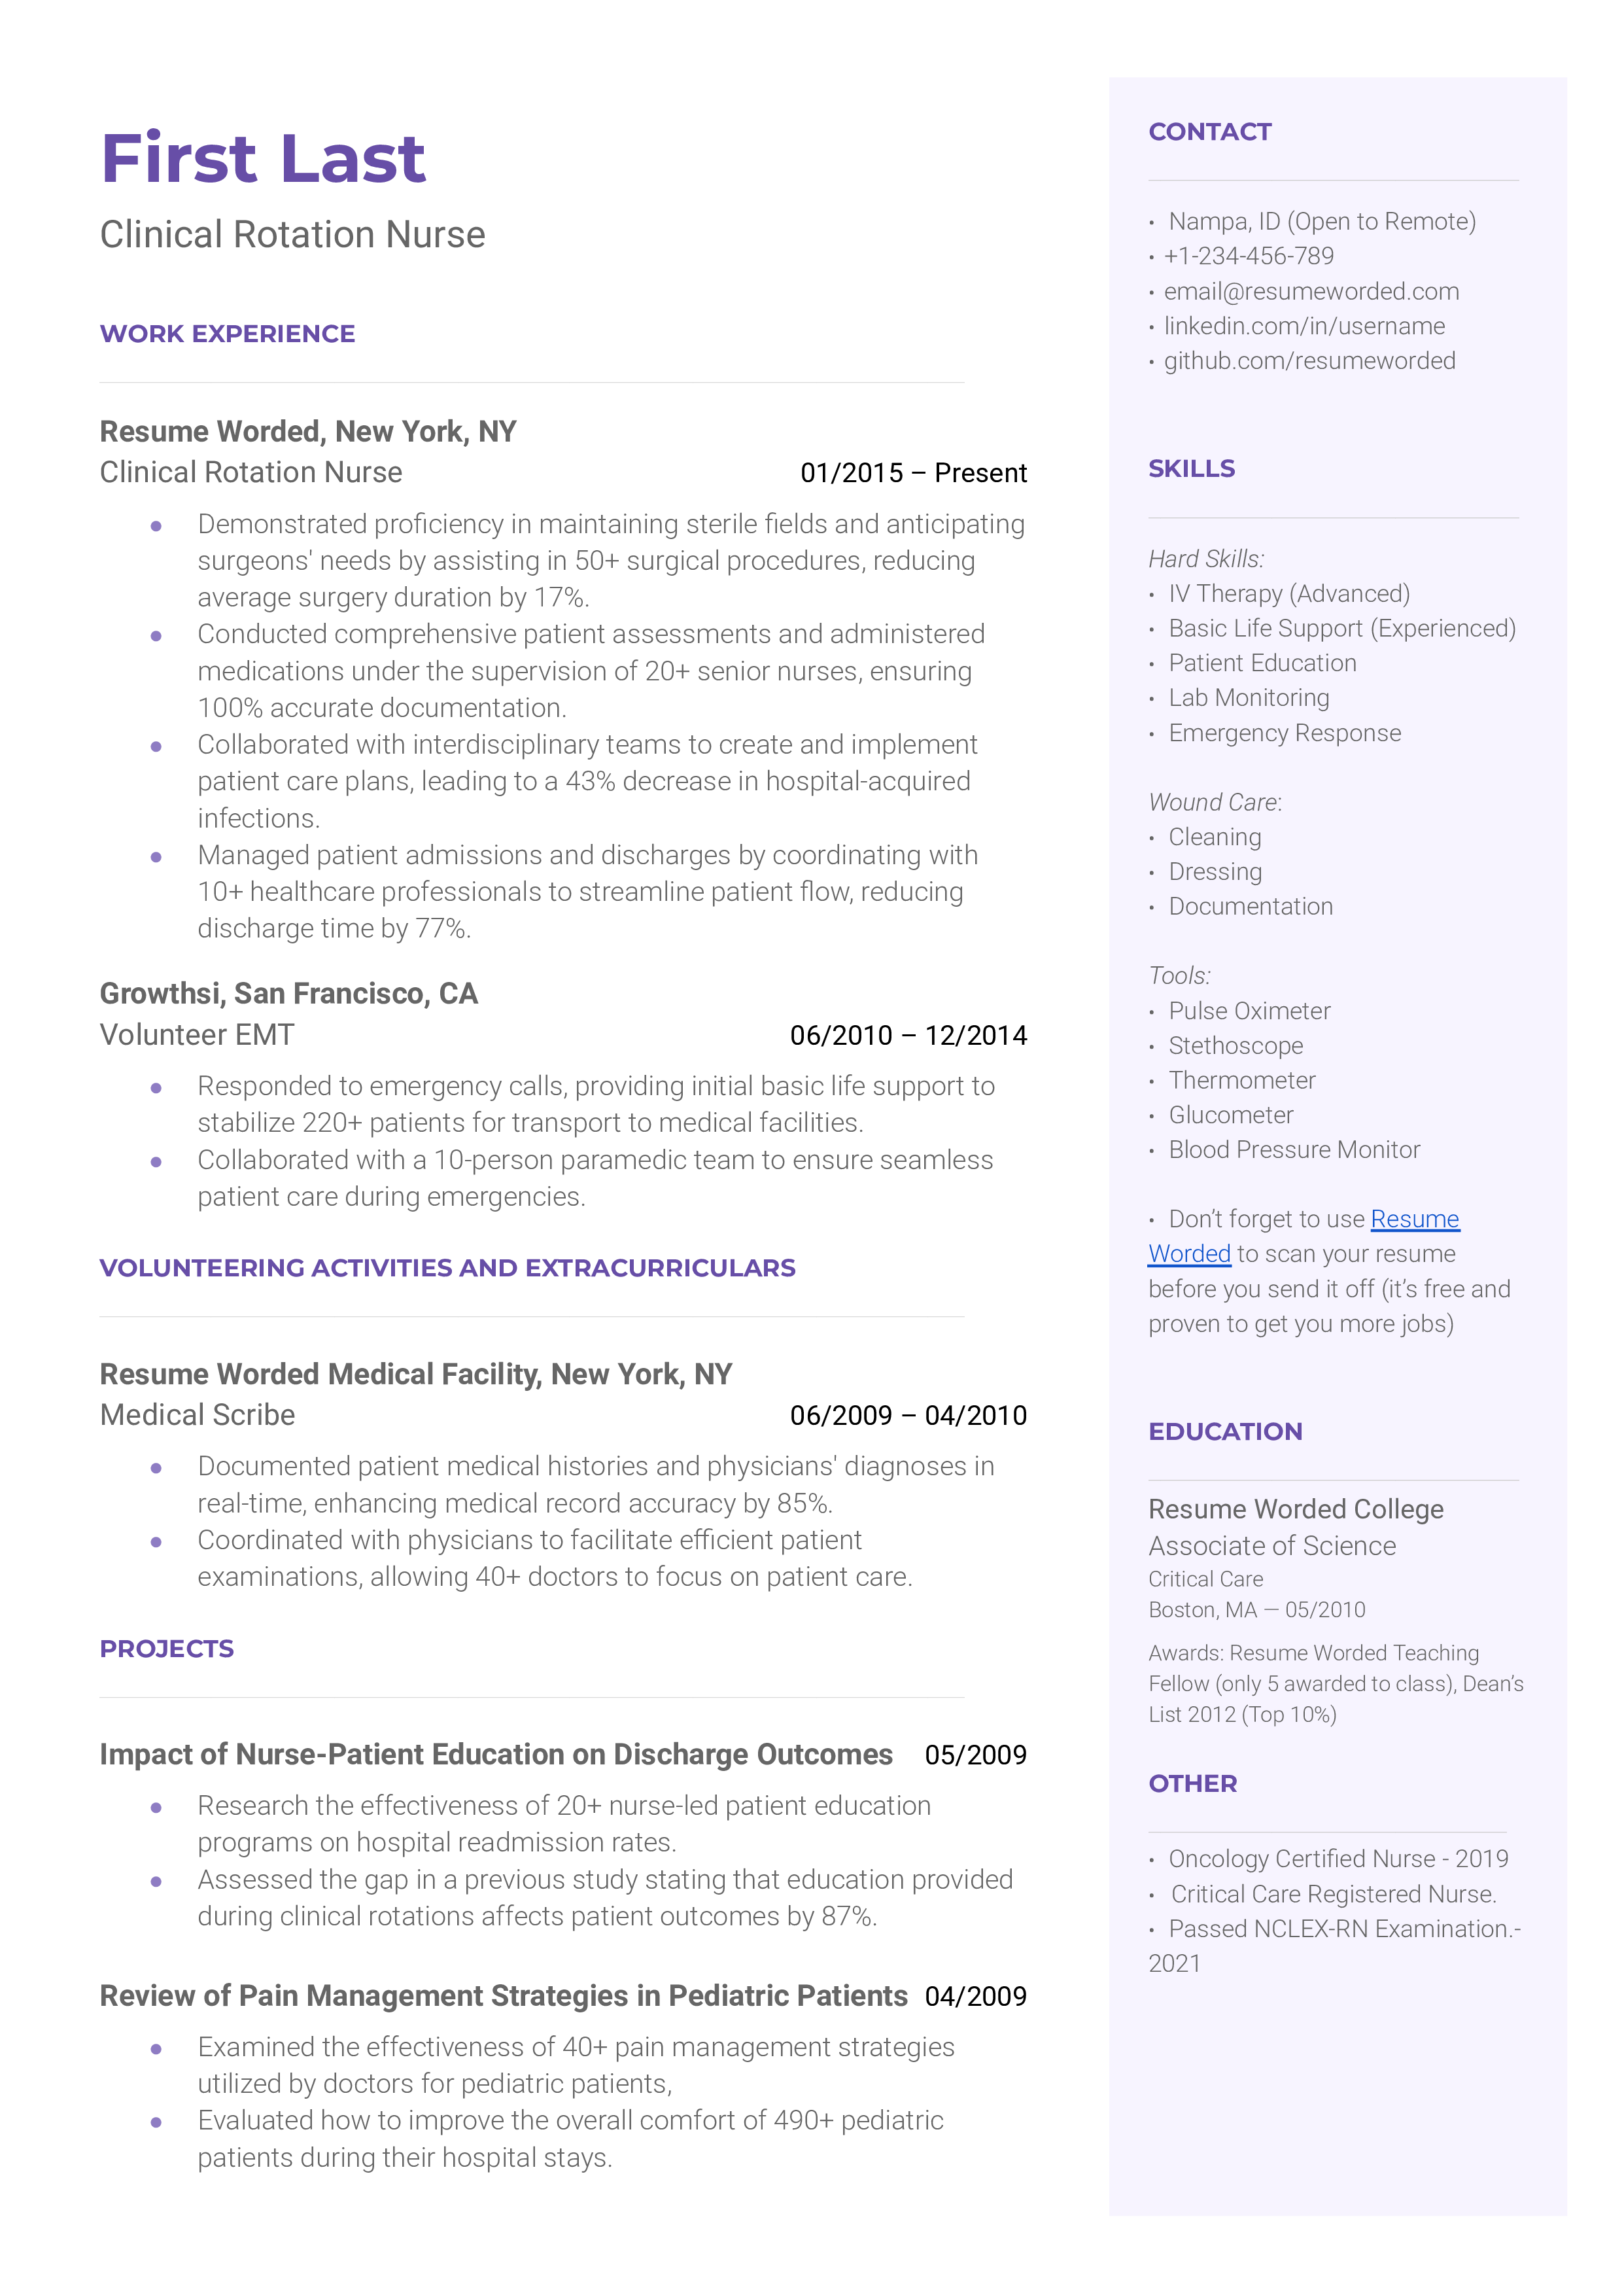 A resume for a Clinical Rotation Nurse showcasing versatility in hospital work.